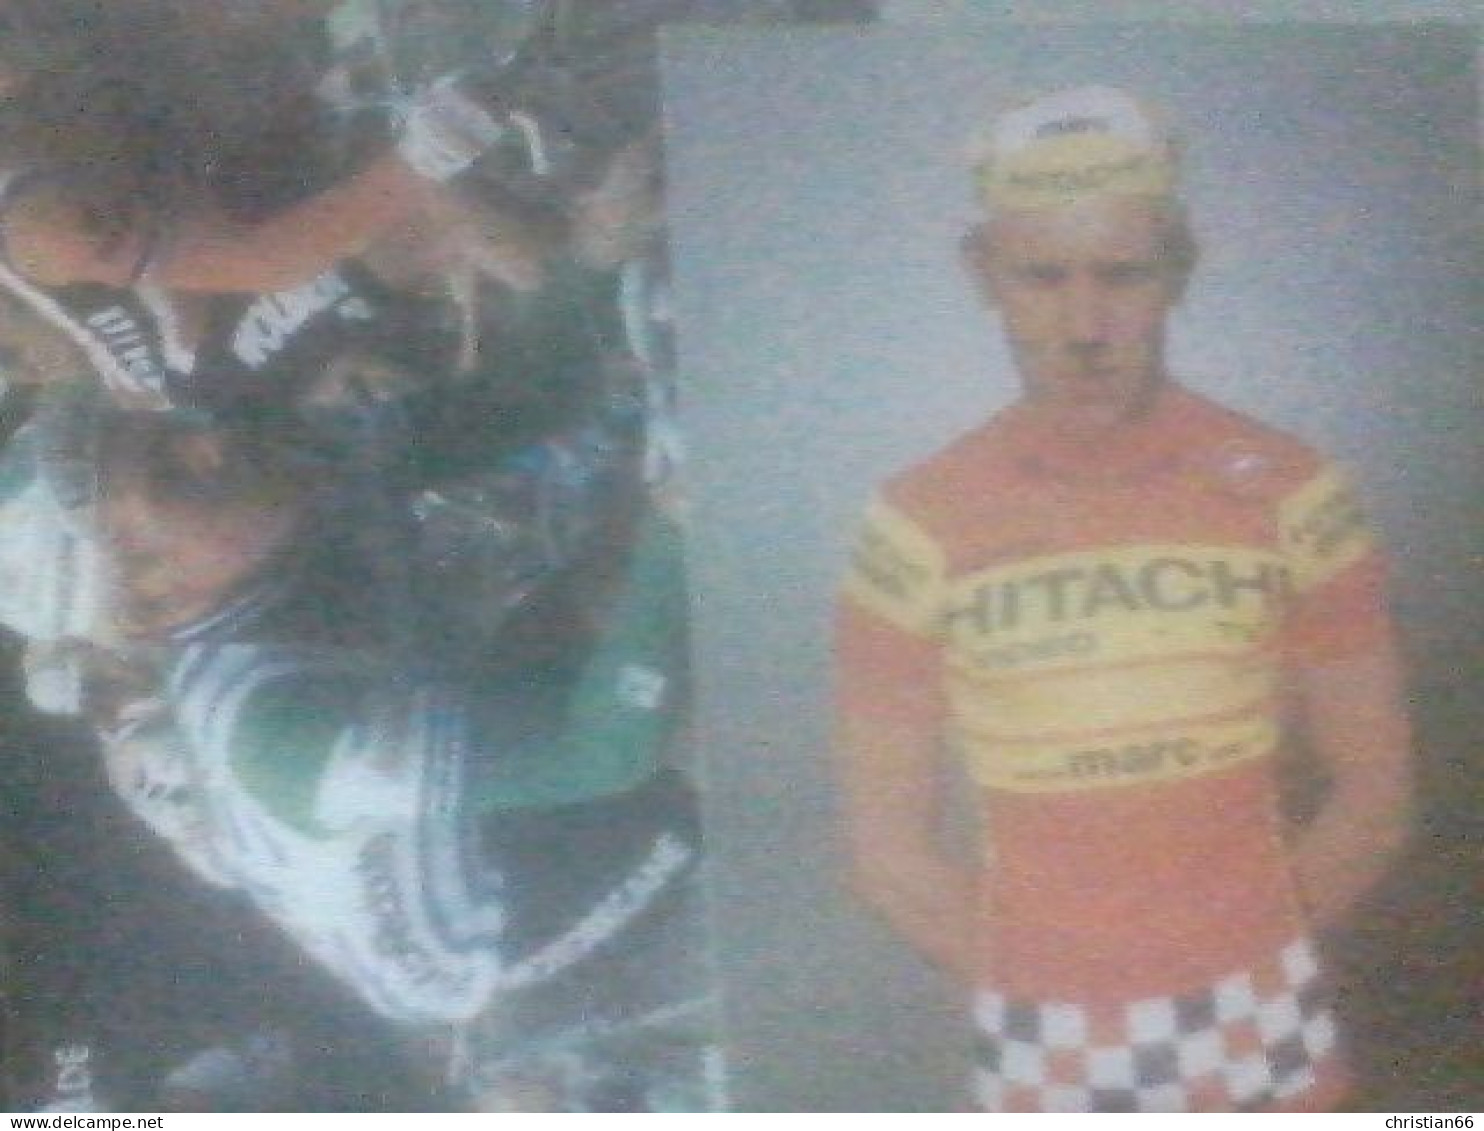 CYCLISME  - WIELRENNEN- CICLISMO : 2 CARTES ETIENNE DE WILDE 1982 +1986 - Cycling